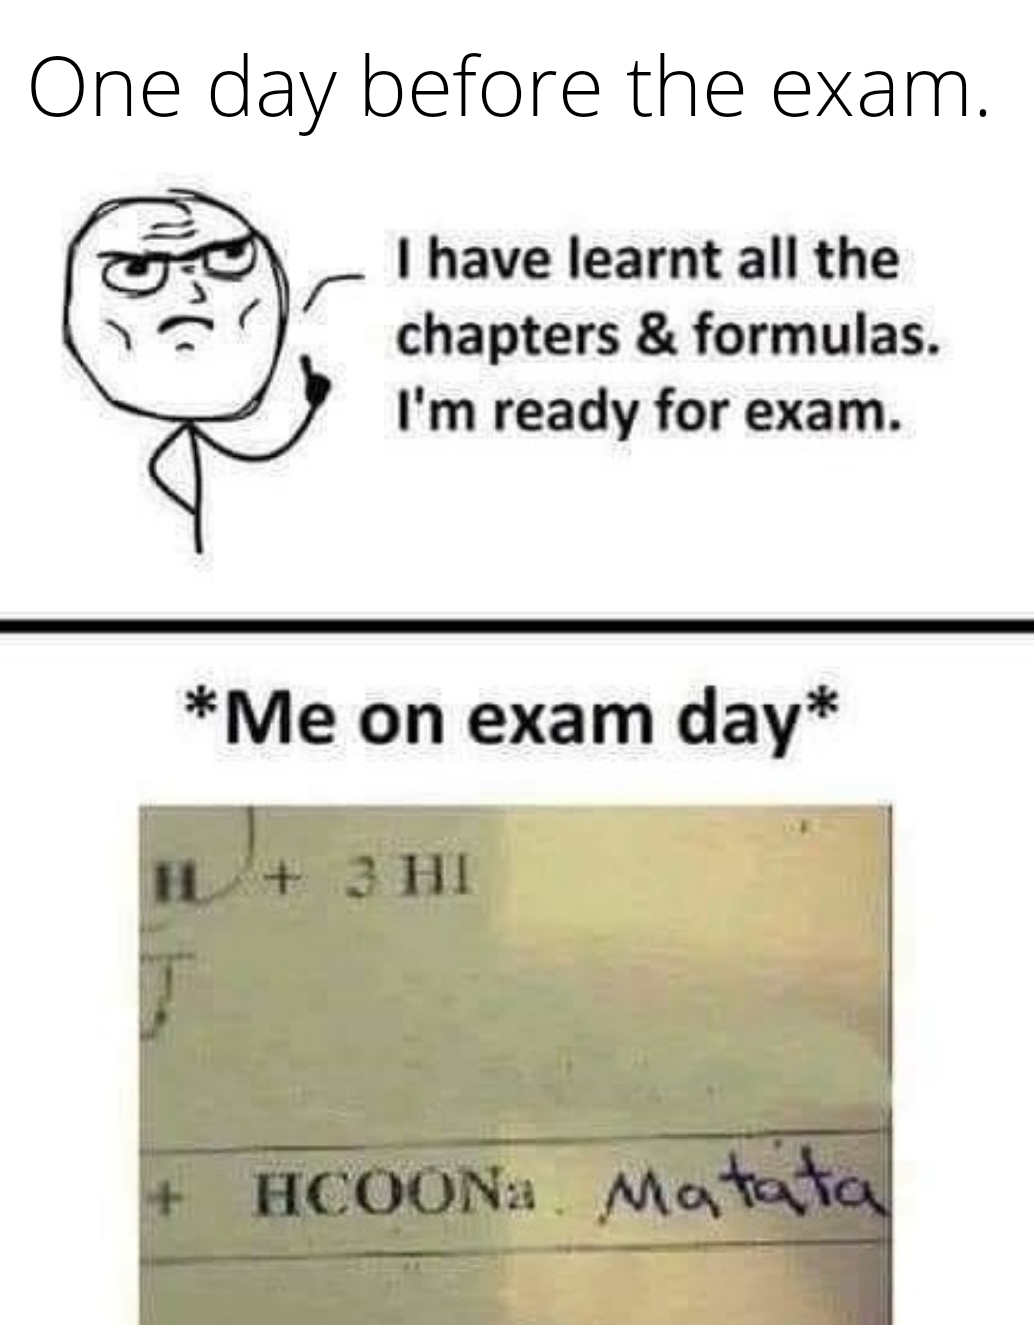 funny memes - angle - One day before the exam. I have learnt all the chapters & formulas. I'm ready for exam. Me on exam day H 3 Hi HCOONa. Mata ta